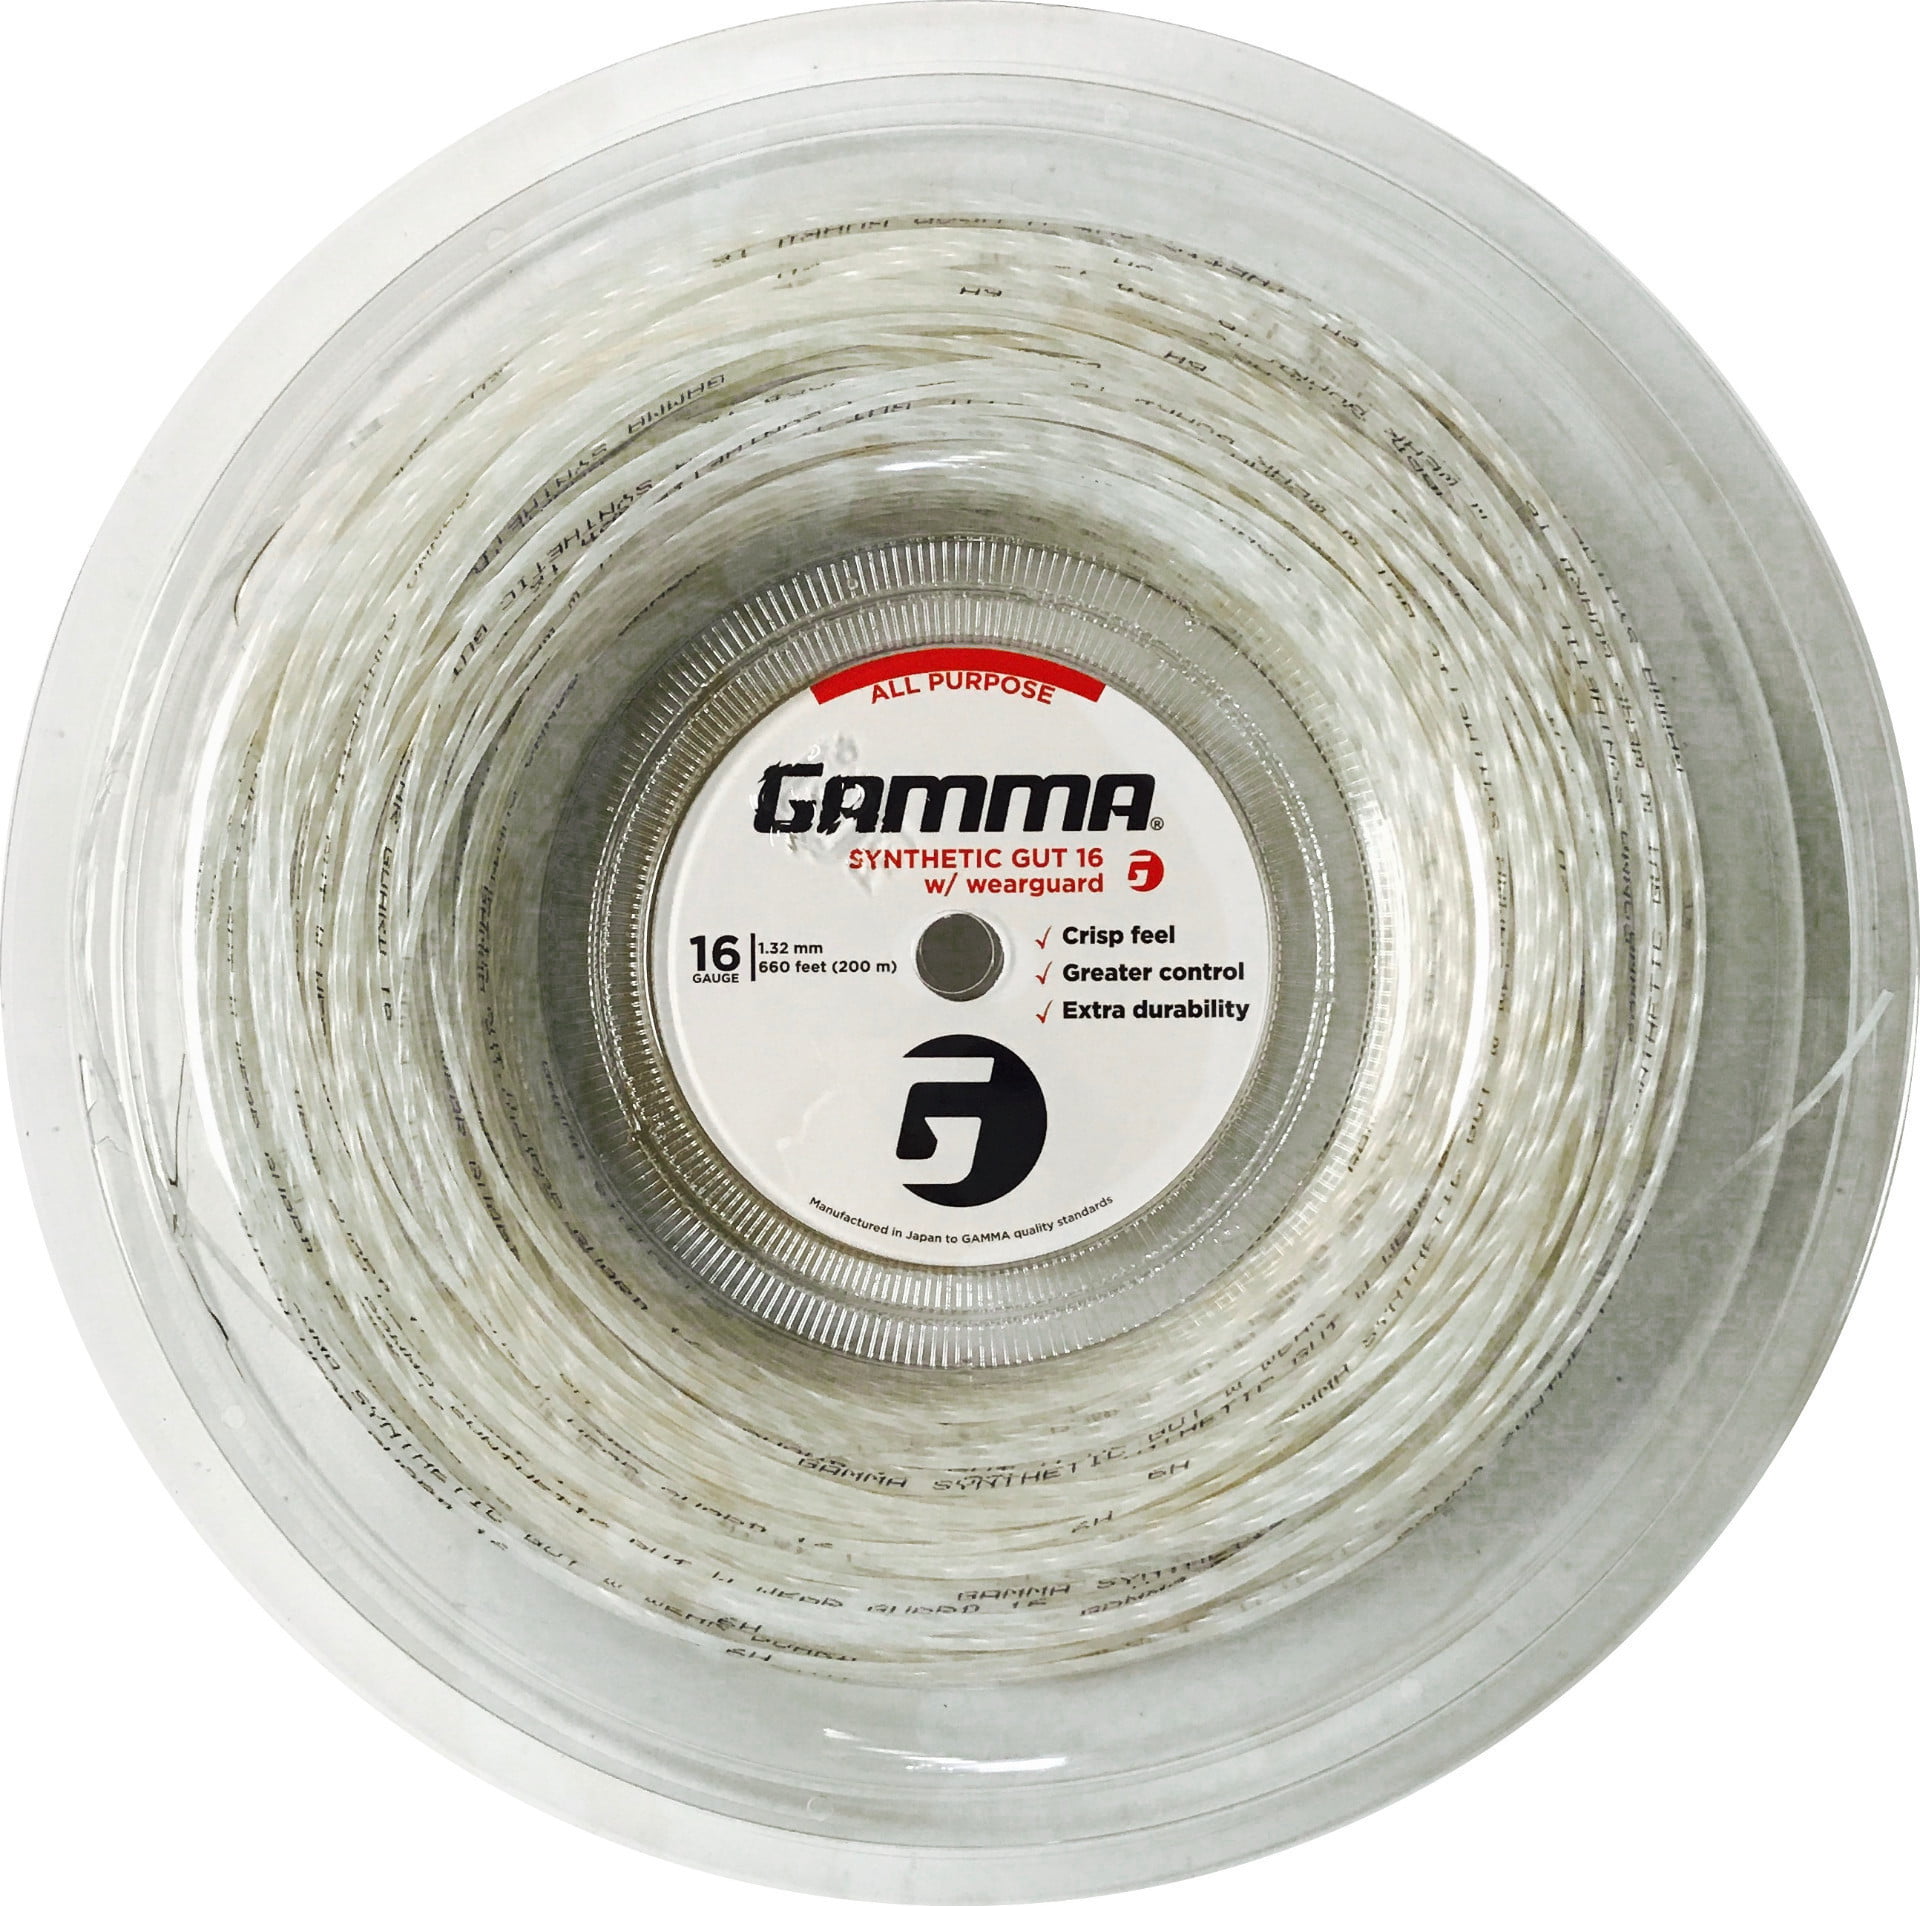 5 Pack Gamma Synthetic Gut 16 Wearguard Strings 